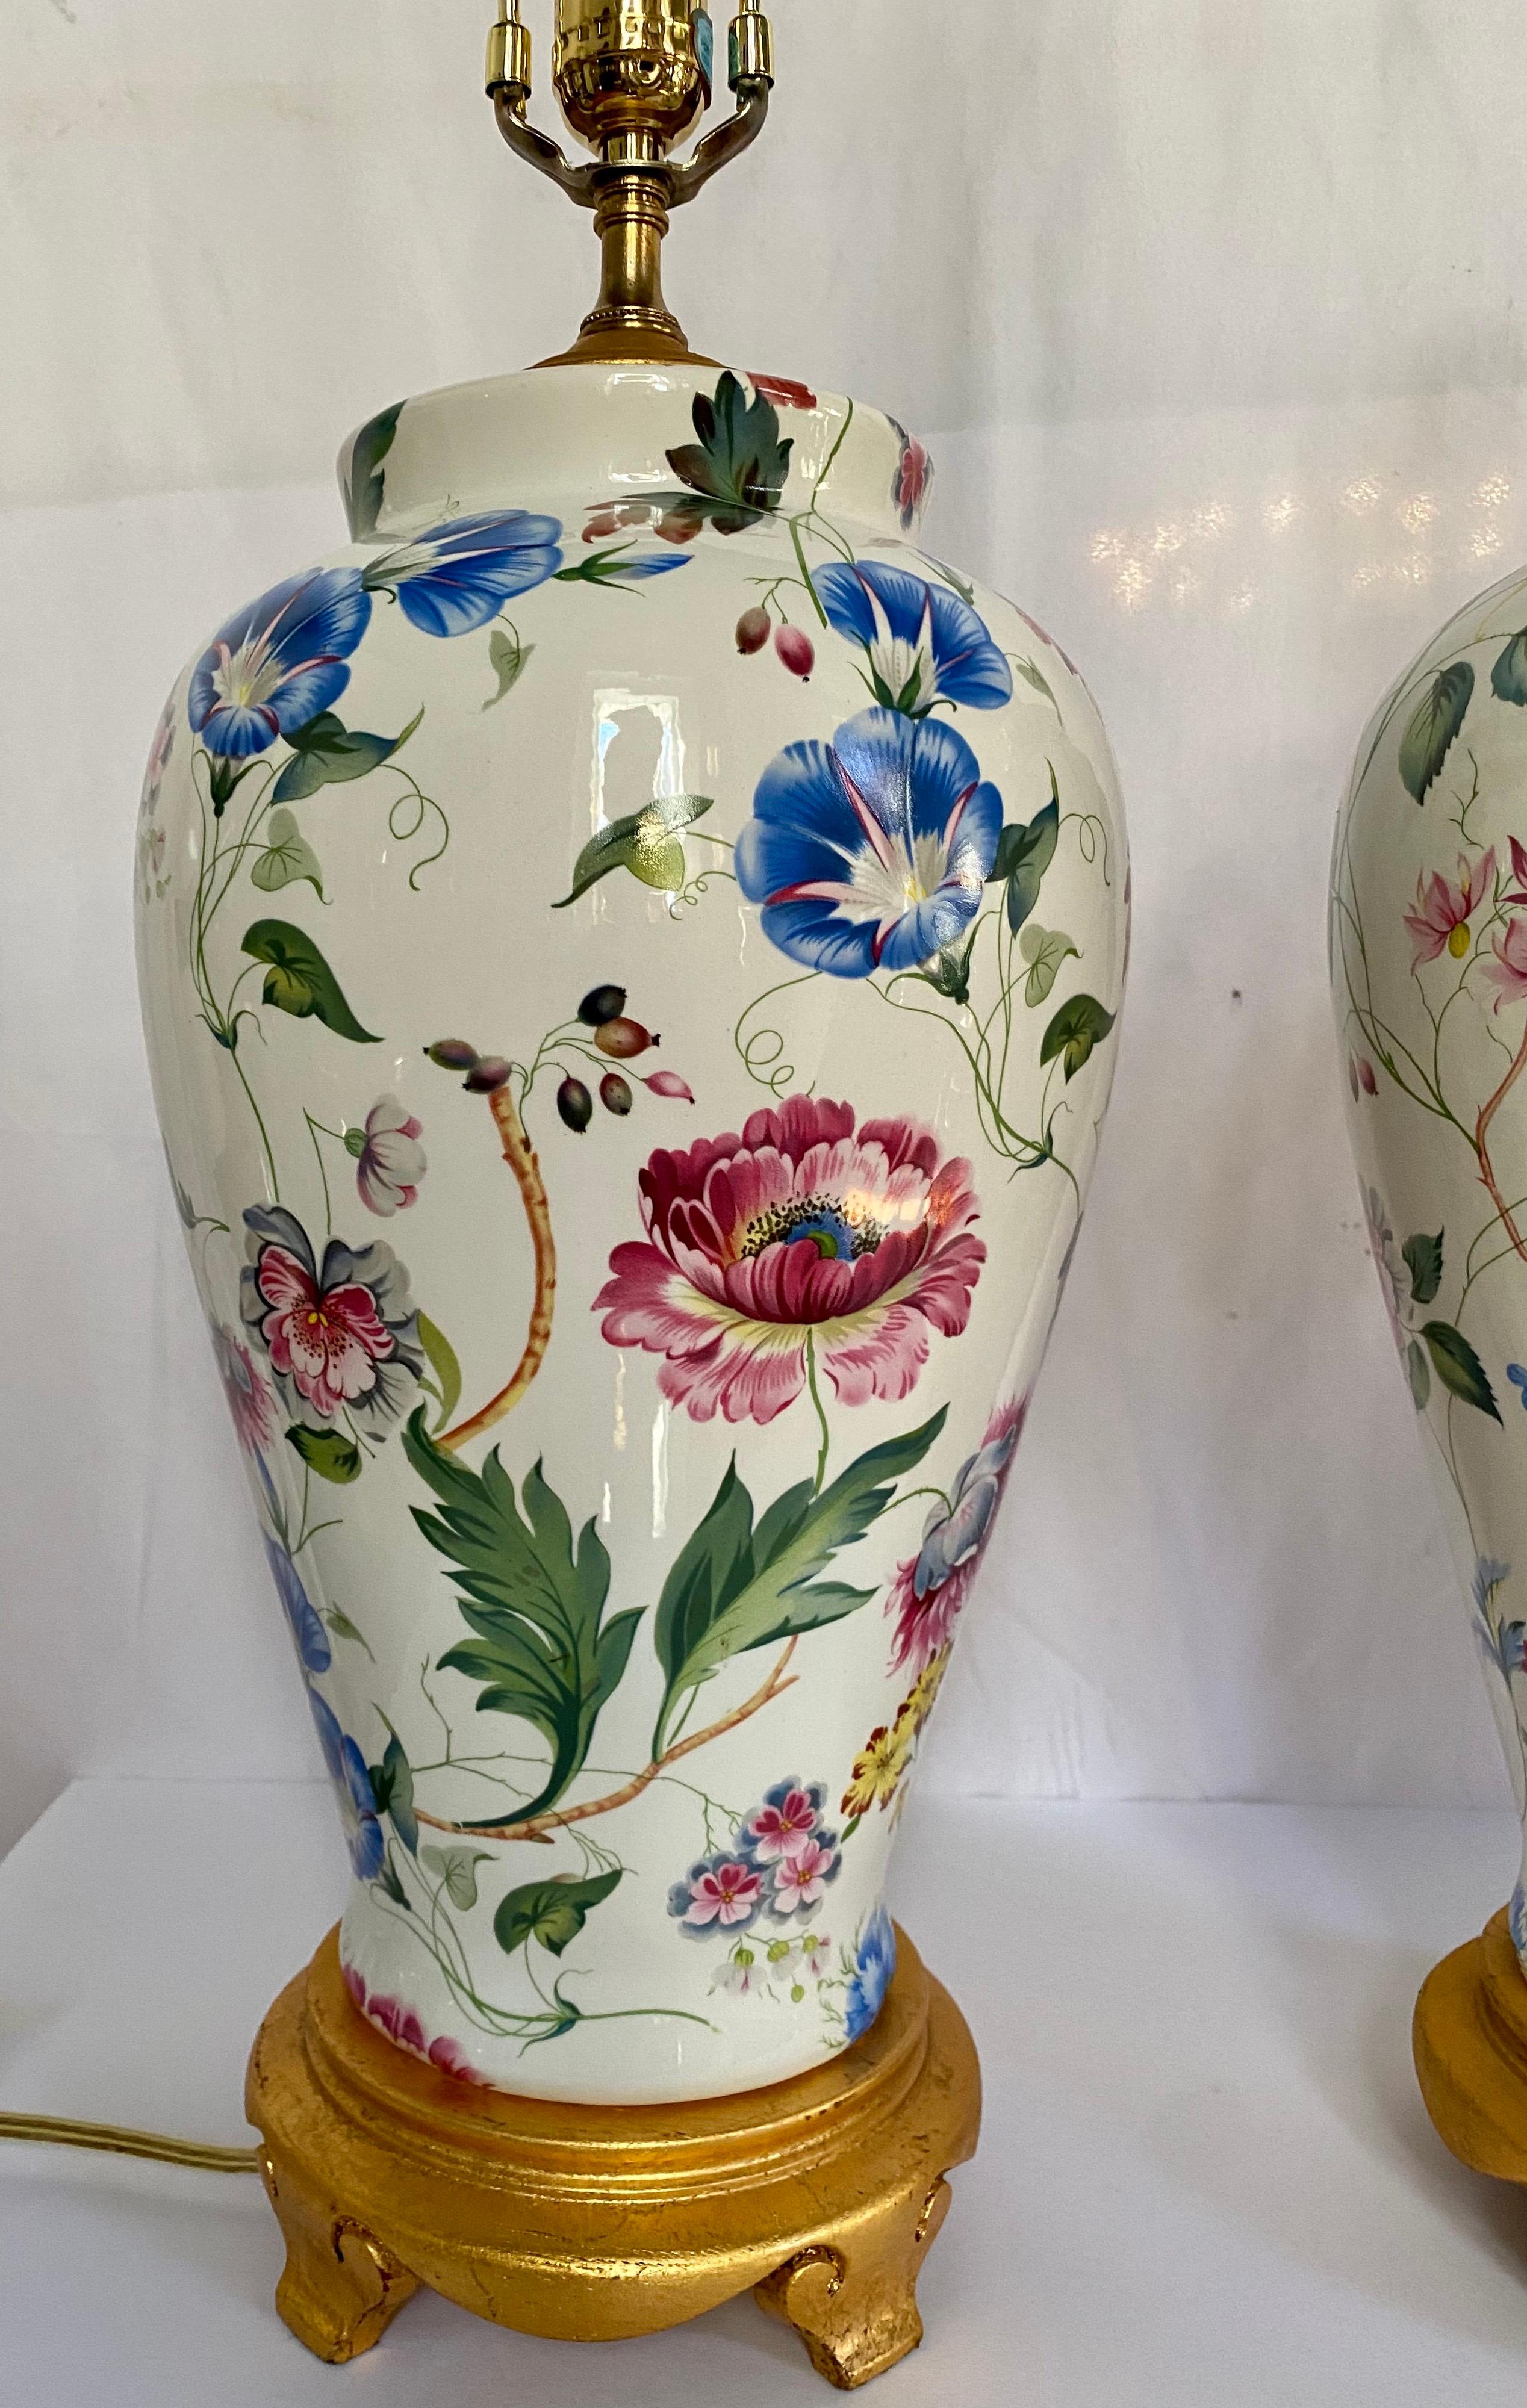 20th Century Porcelain Botanical Floral and Gilt Urn Vase Table Lamps by Chelsea House, Pair